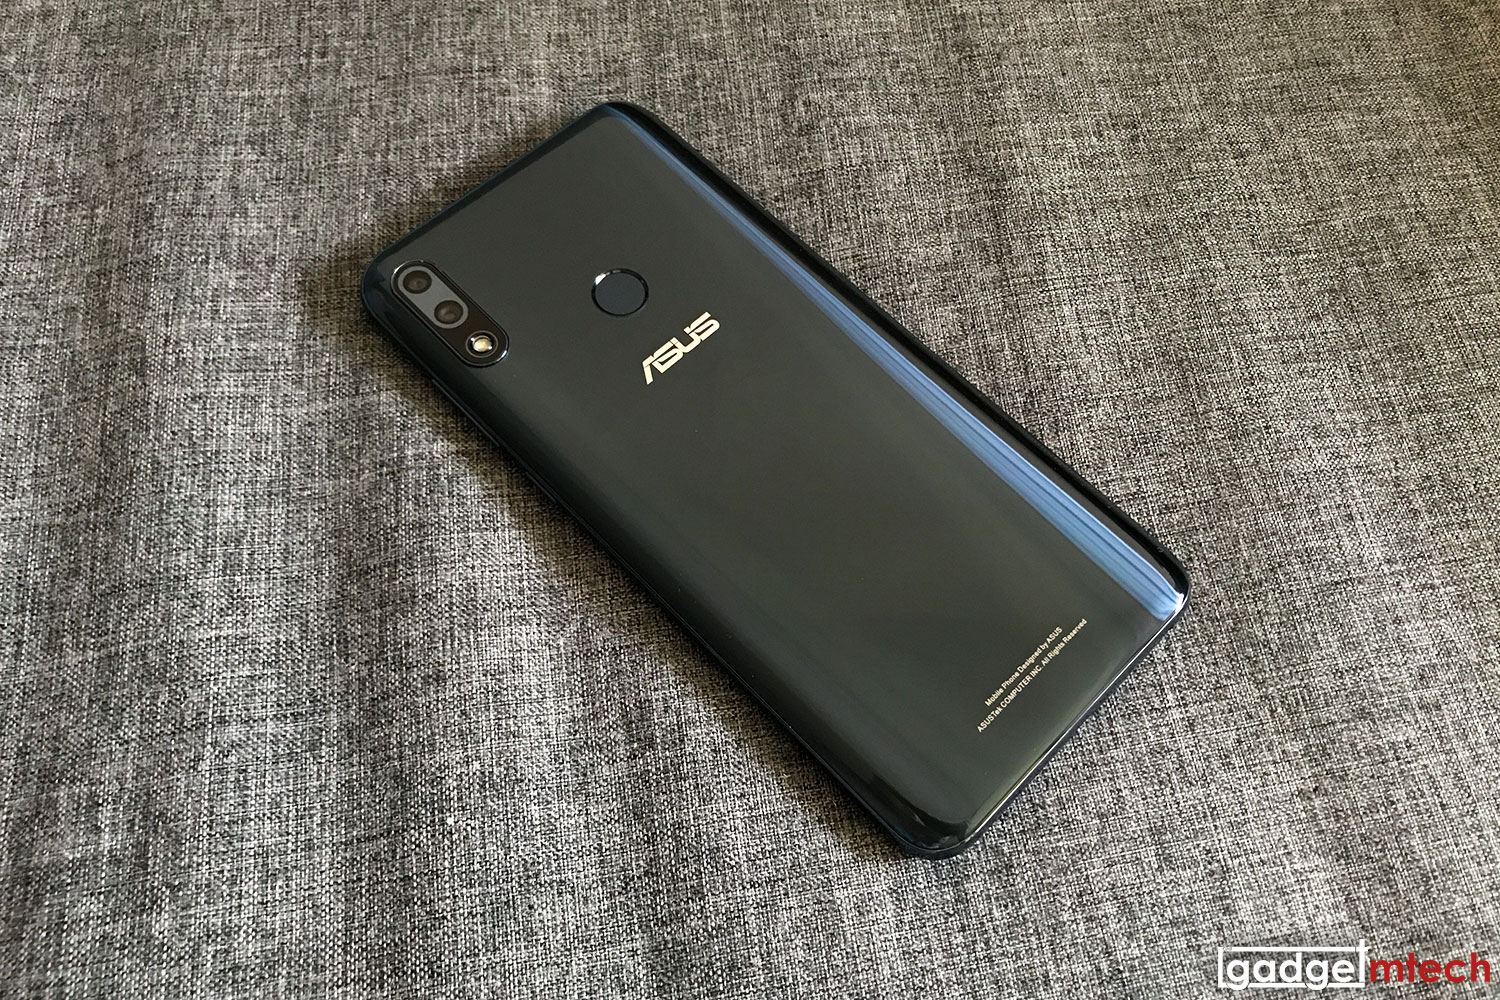 ASUS ZenFone Max Pro (M2) Officially Announced, Priced from RM859